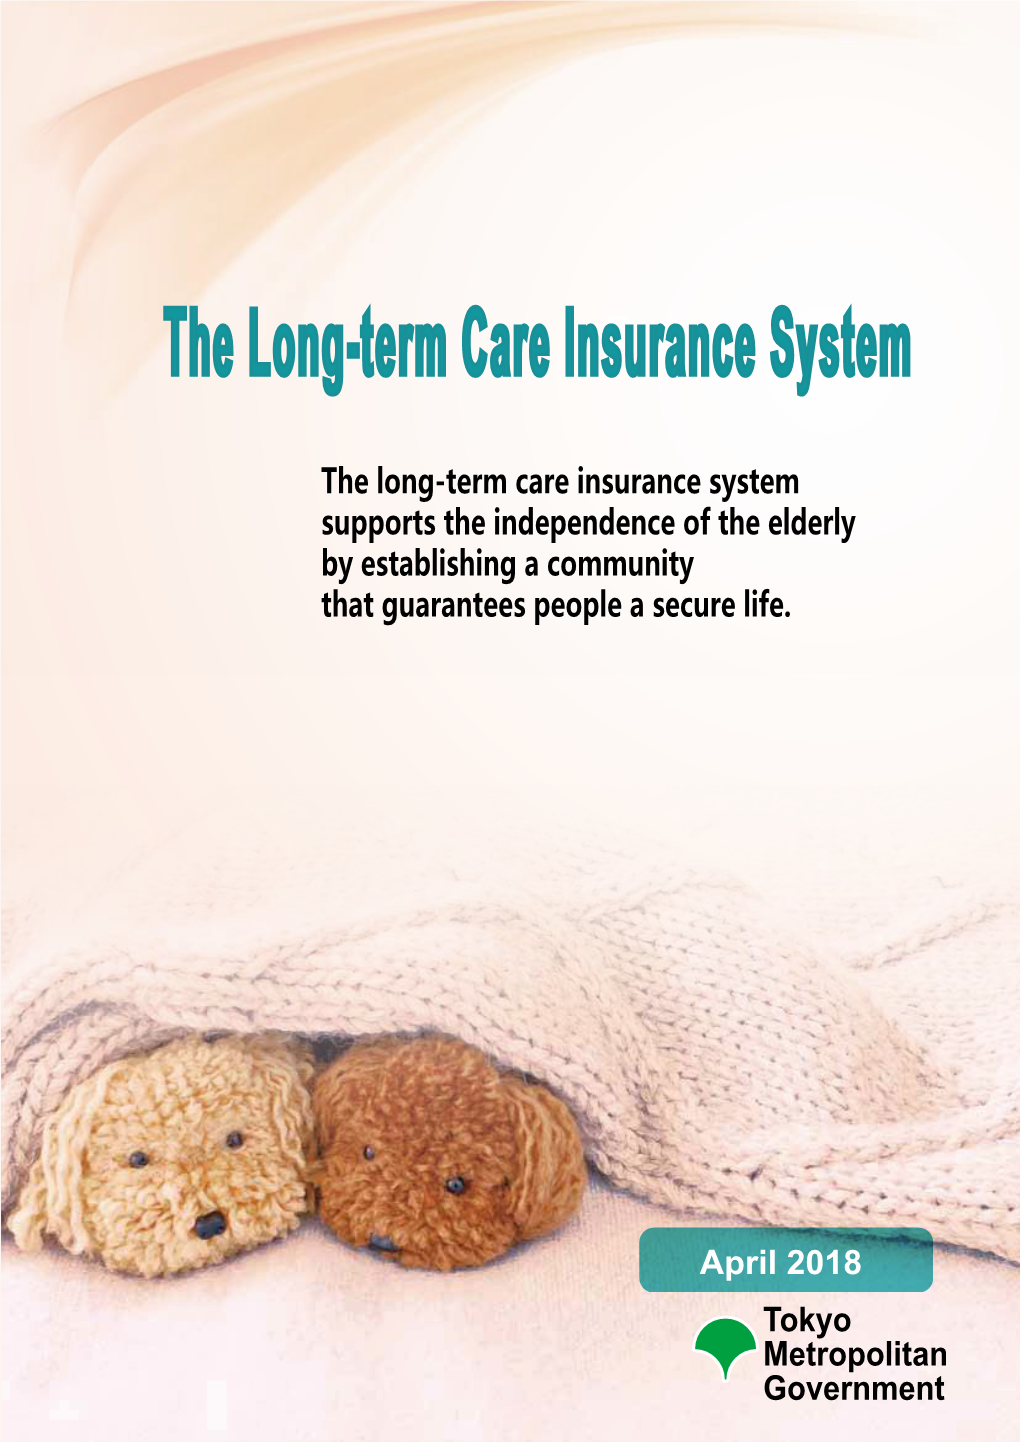 The Long-Term Care Insurance System